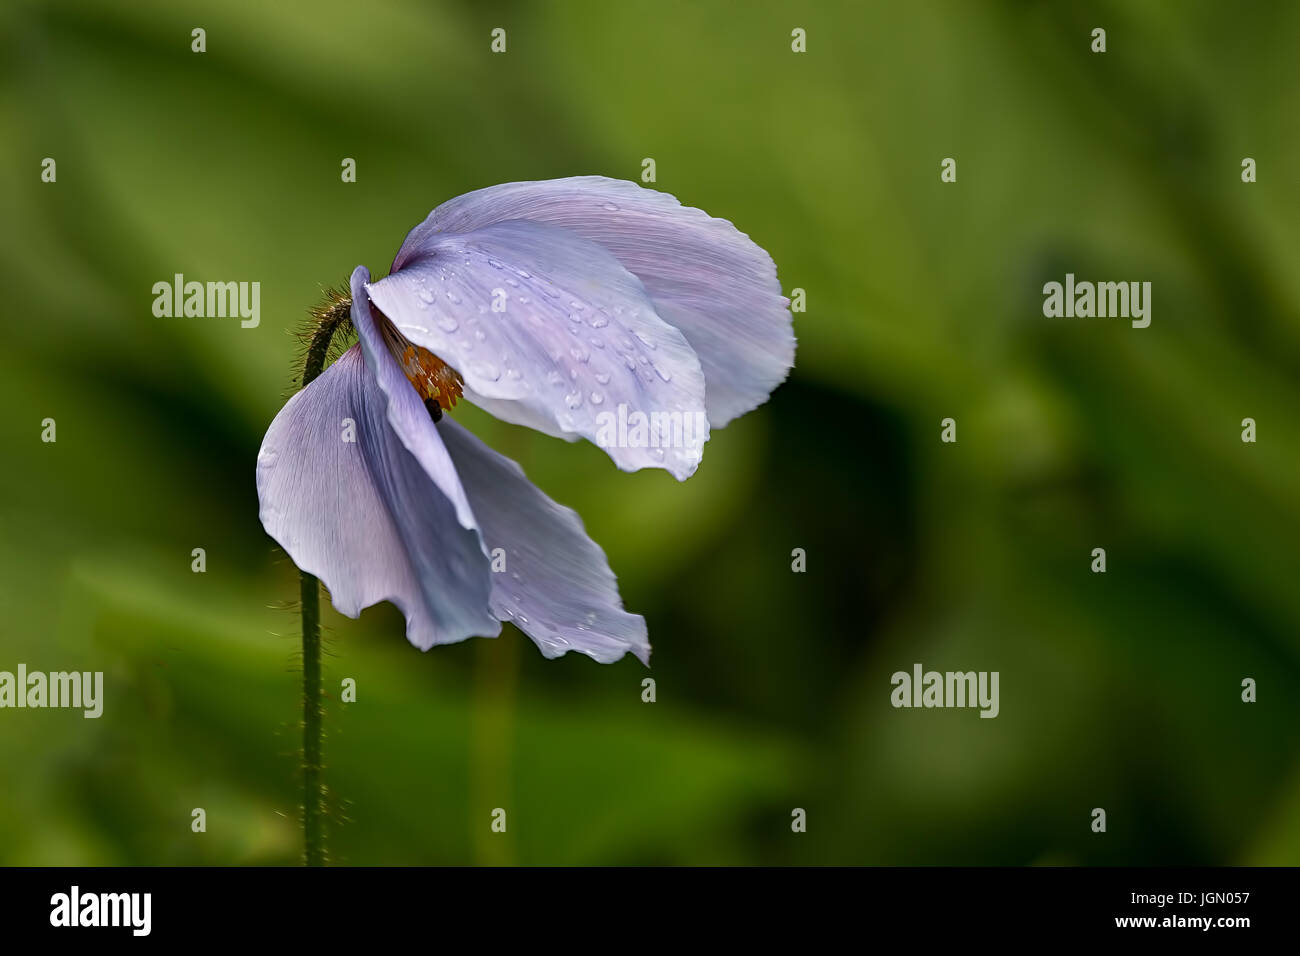 Sheltering.  A Himalayan blue poppy seems to be sheltering its golden yellow stamens from the rain. Stock Photo